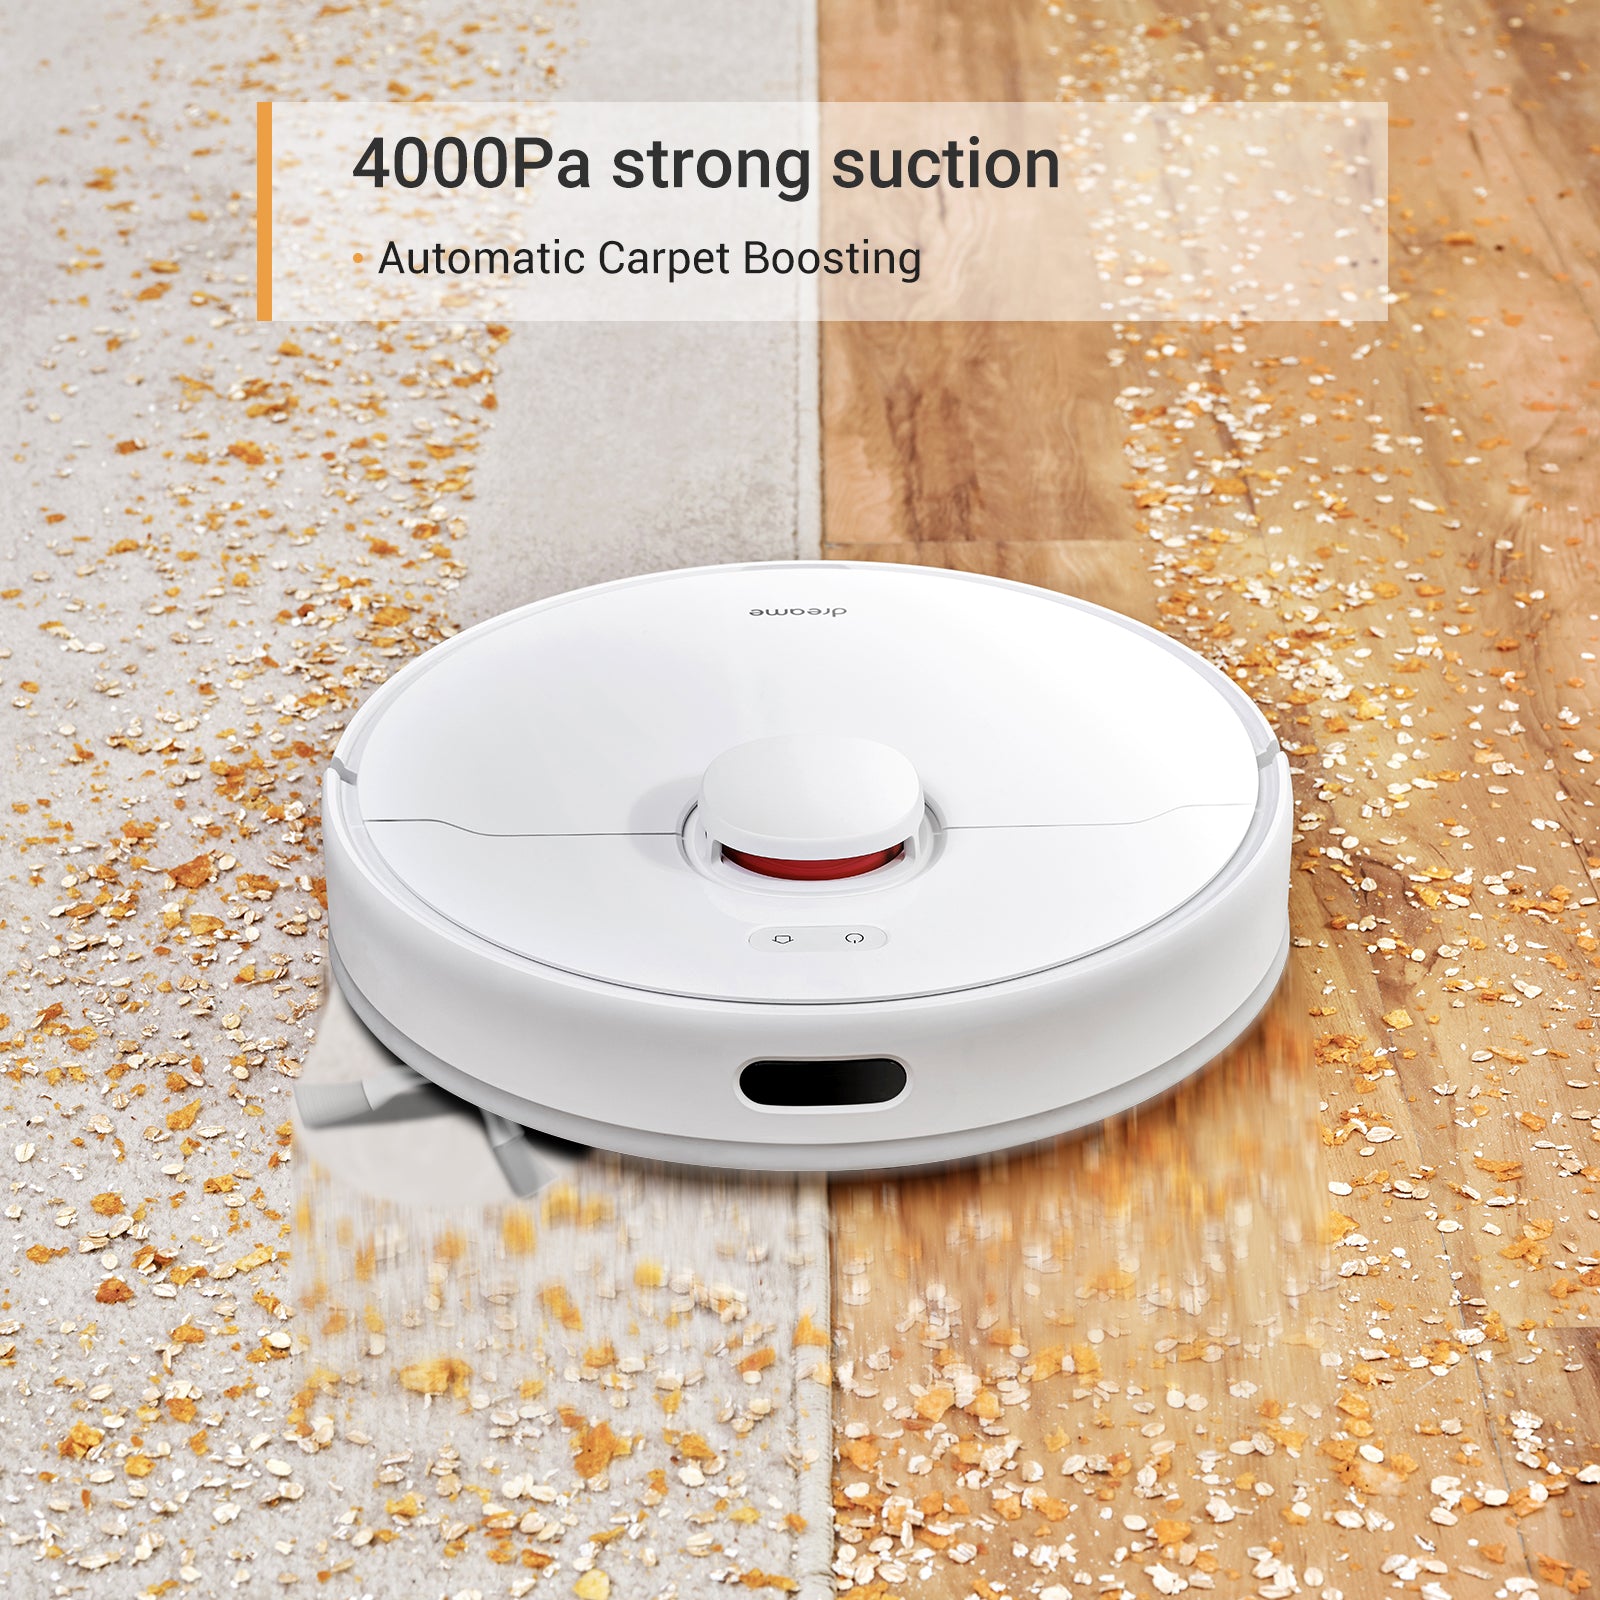  Dreametech D10 Plus Robot Vacuum and Mop with Self-Emptying  Base, Main Roller Brush Compatible with D10 Plus/L10 Pro/D9 Pro/D9 Max  Robot Vacuum